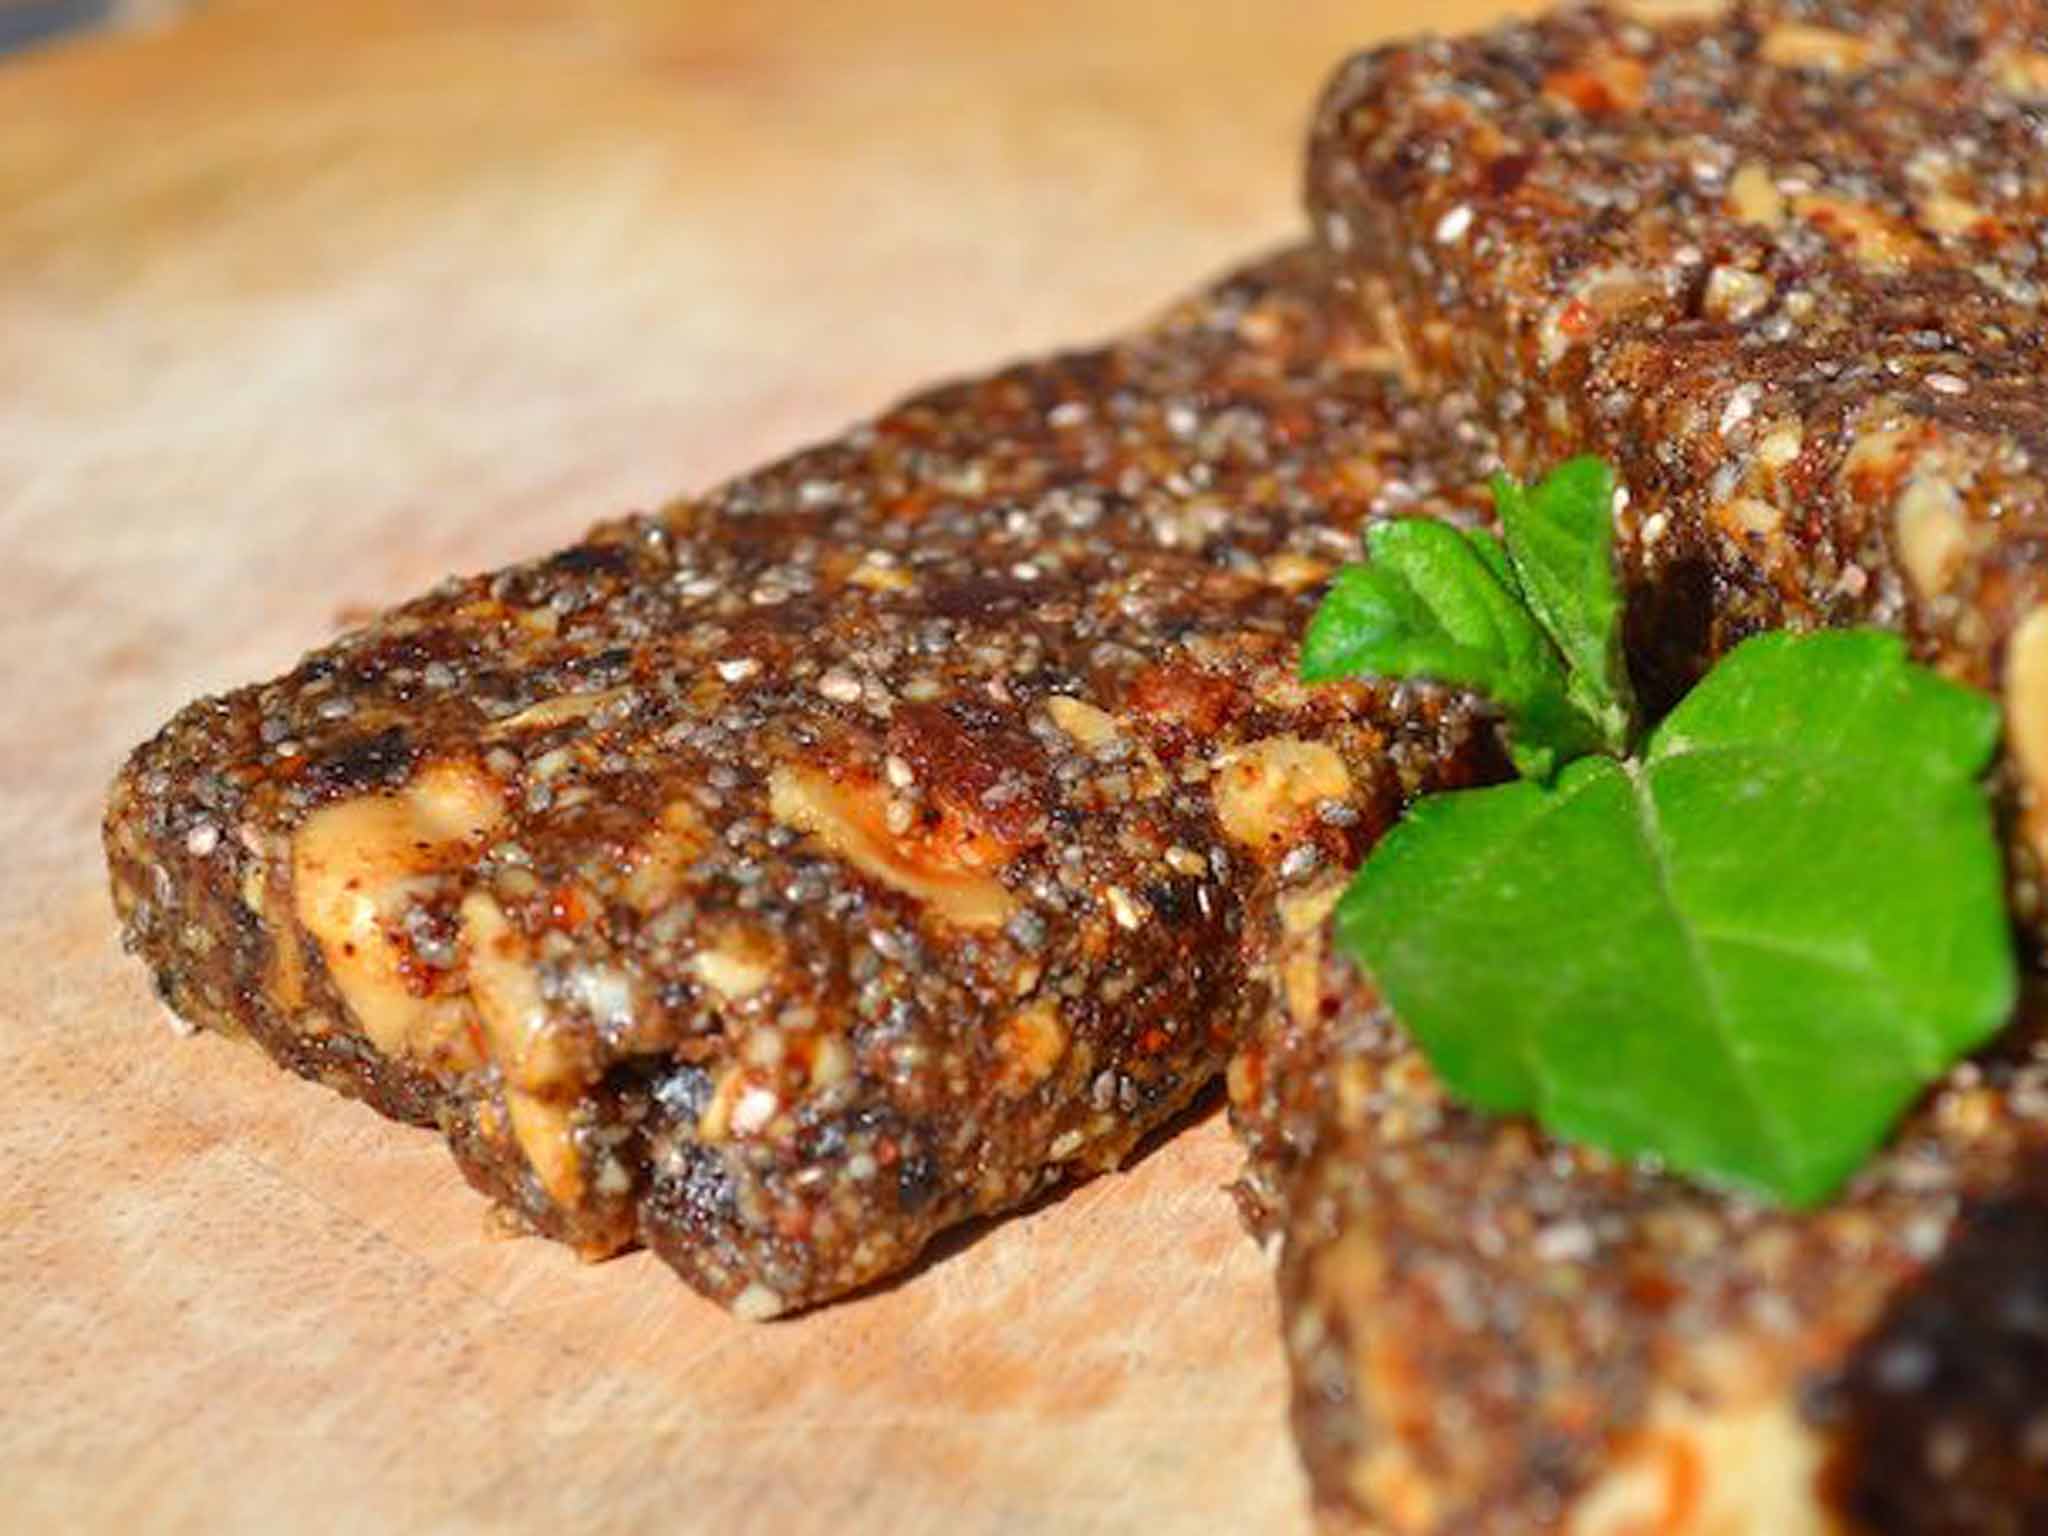 Crobar: a range of healthy protein bars made using fruits, nuts and high-protein flour derived from freeze-dried, pulverised crickets